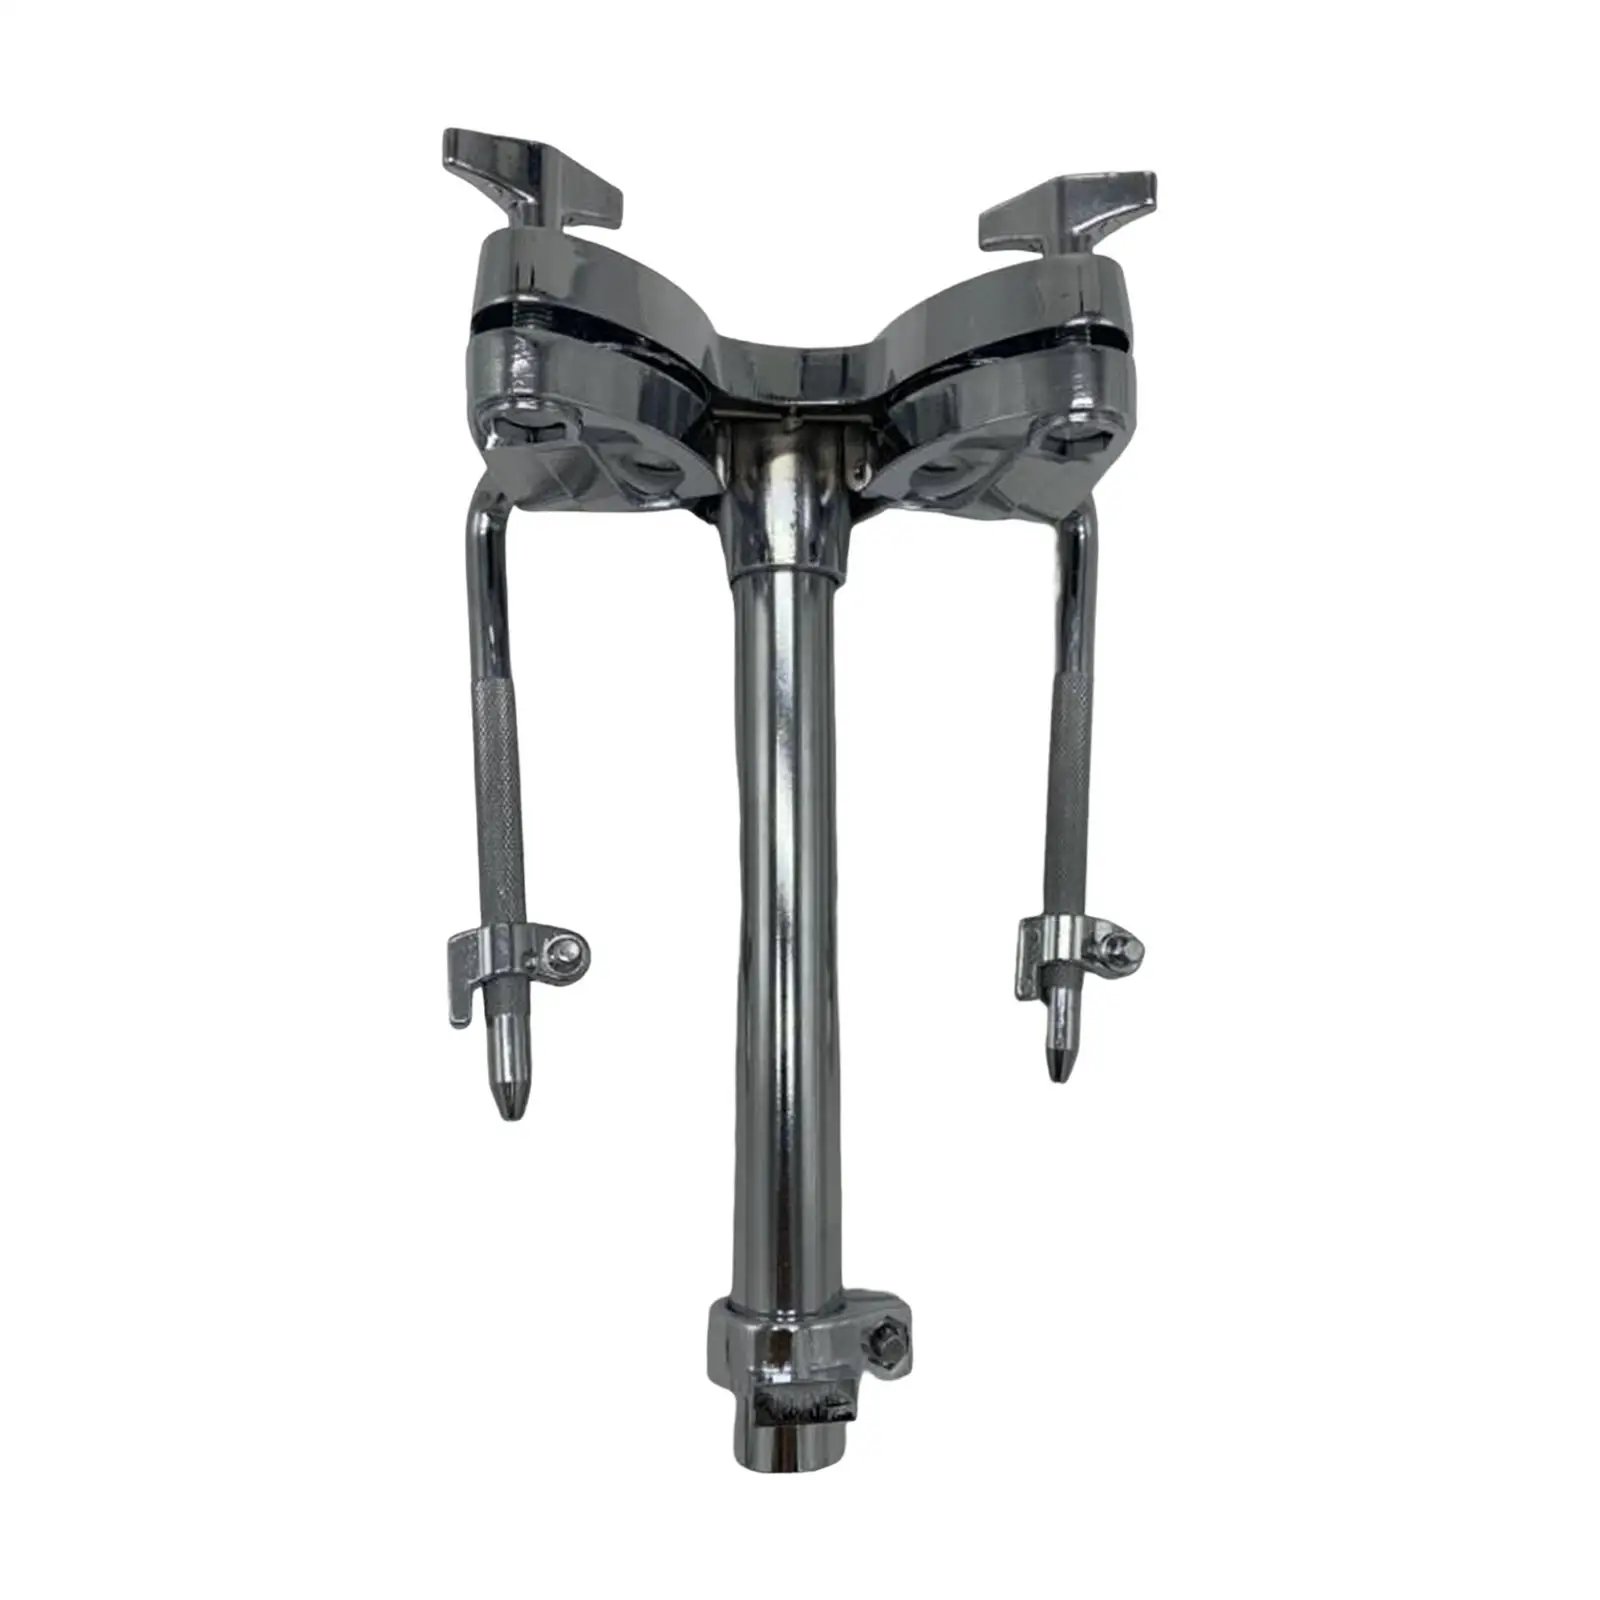 Double Tom Holder Metal Drum Parts Instrument Replaces Parts Sturdy Tom Arm Mount Support for Bass Drum Set Tom Drum Spare Part